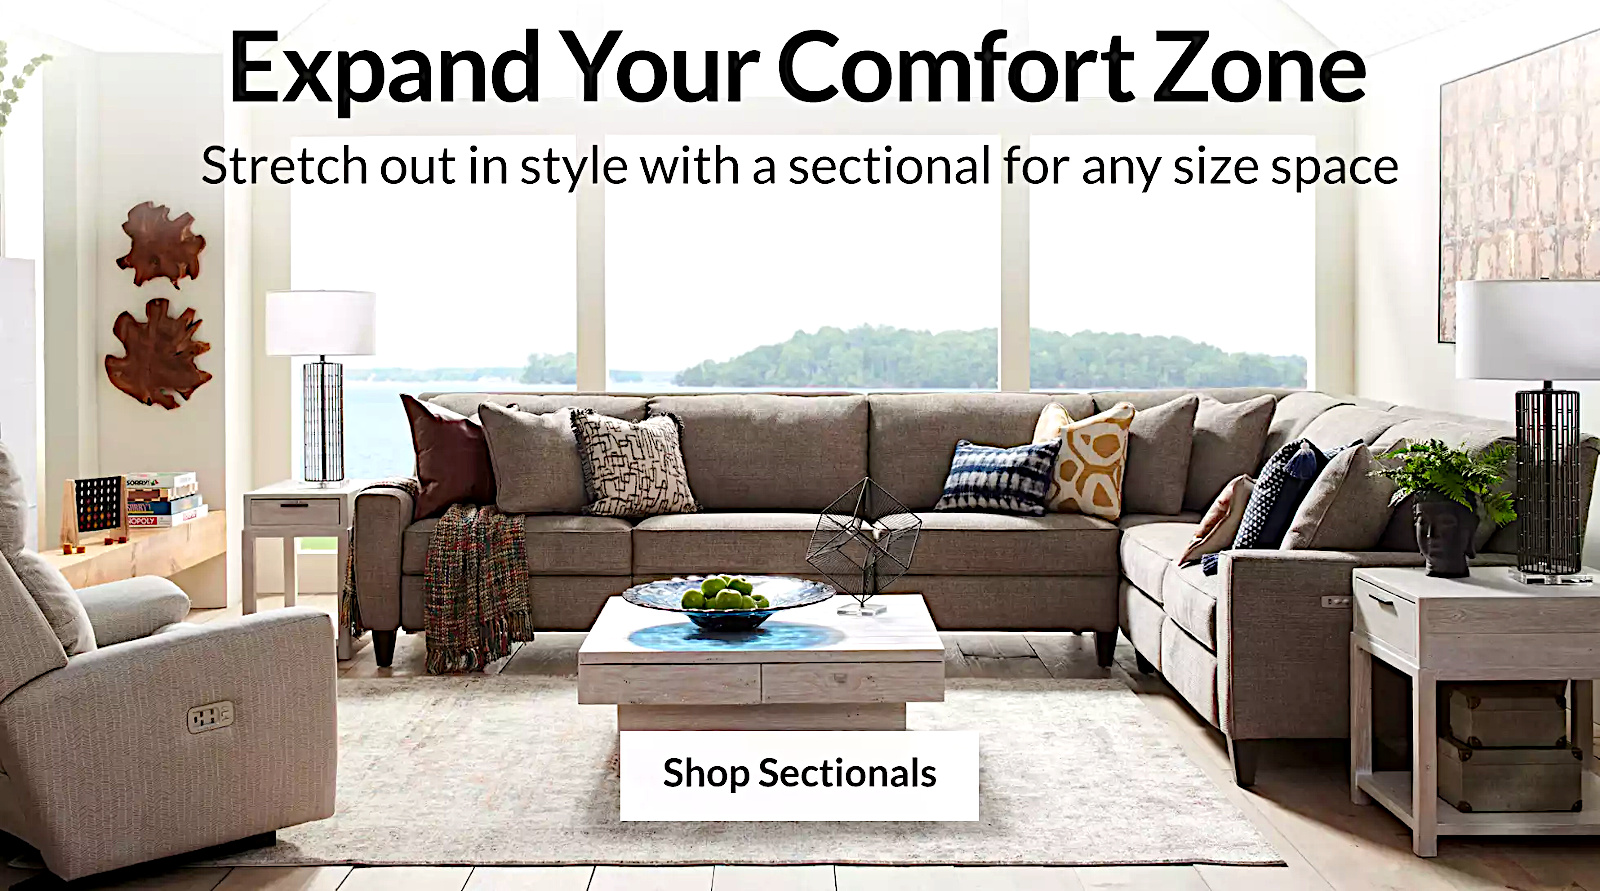 Expand your comfort zone deals